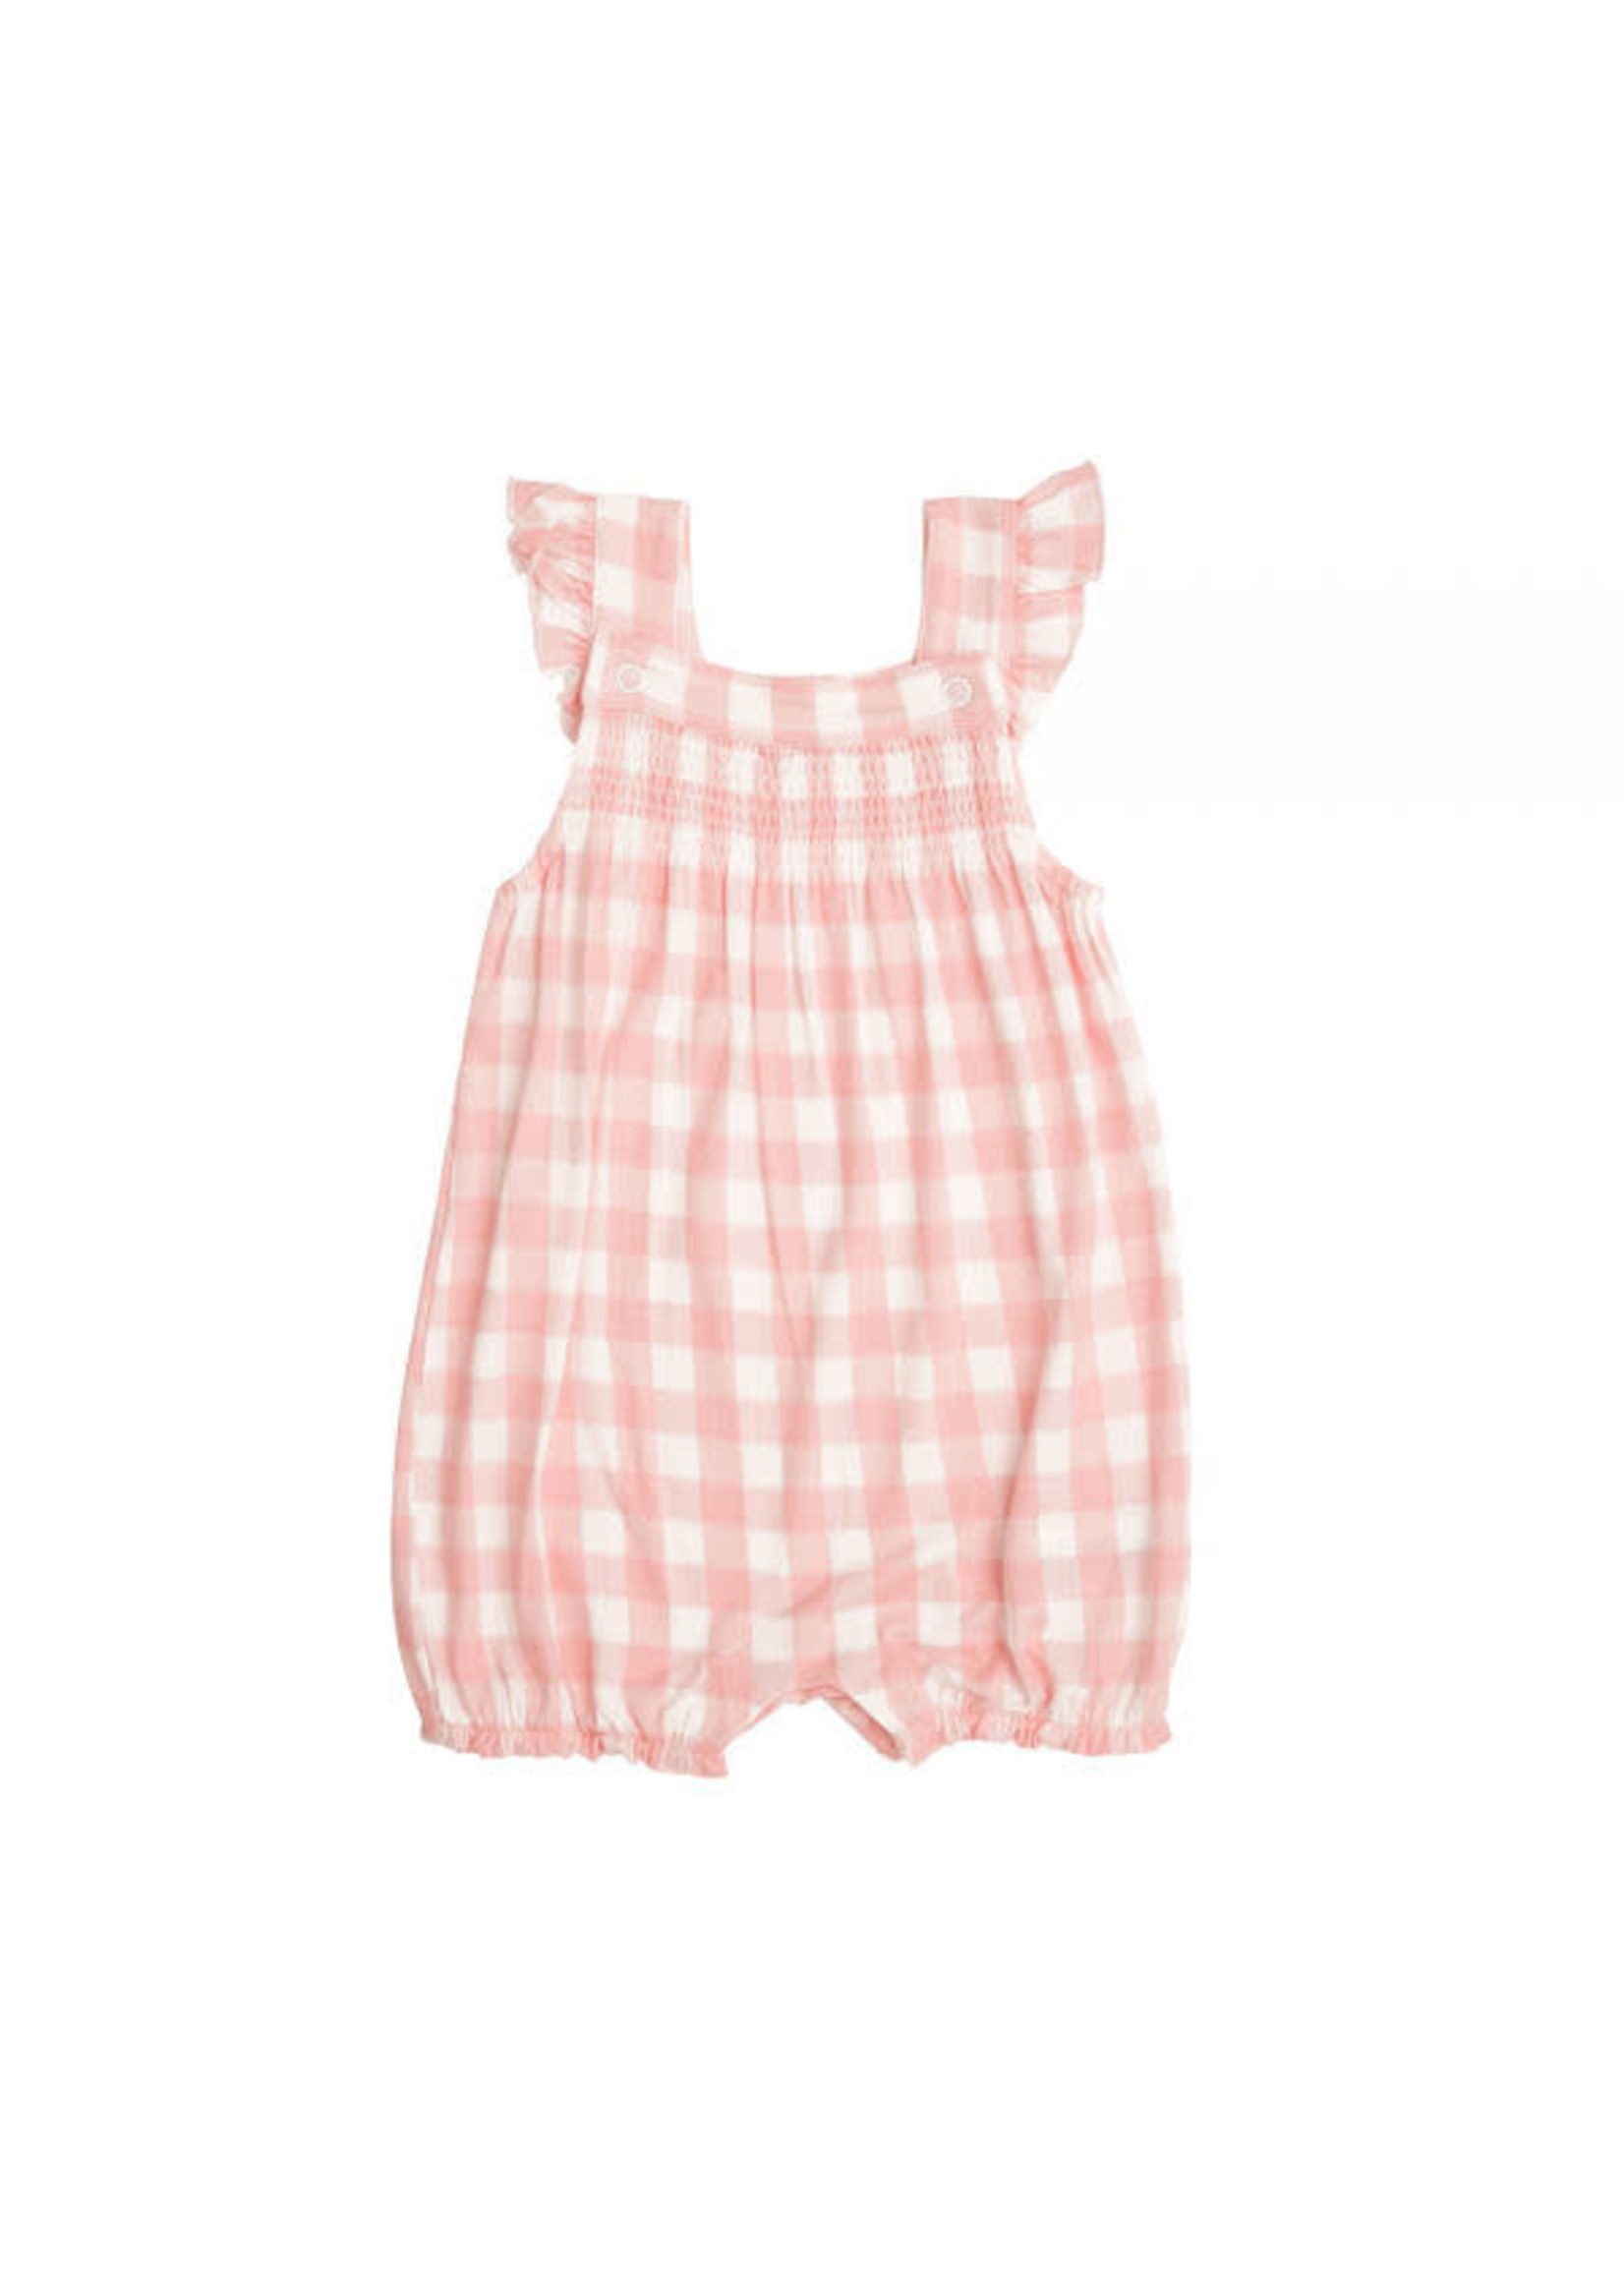 Angel Dear Gingham Pink Smock Overall Shortie